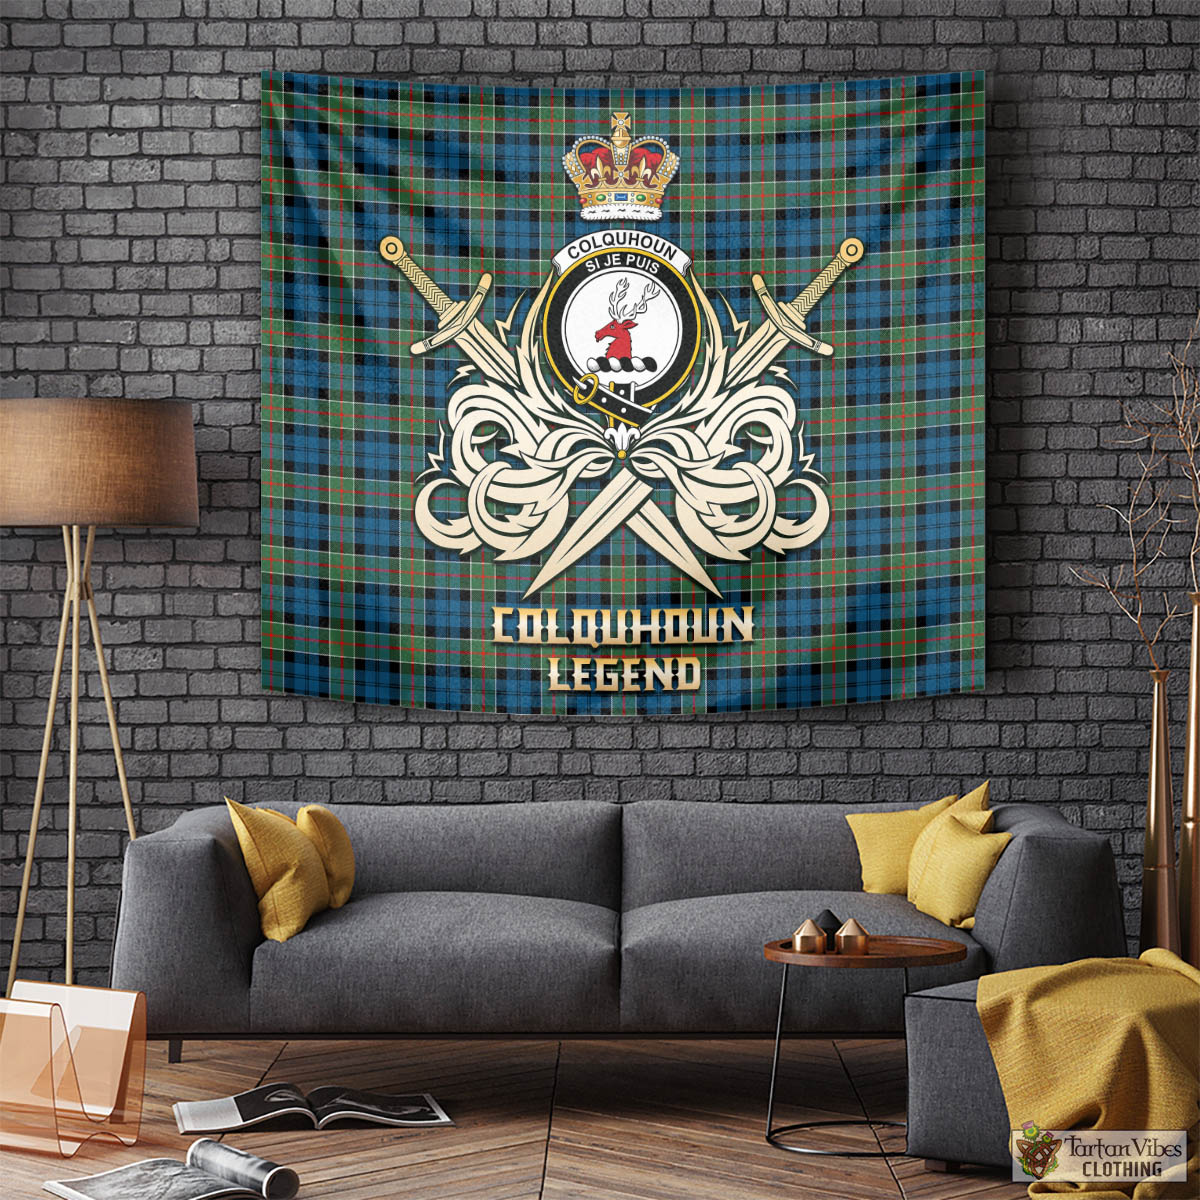 Tartan Vibes Clothing Colquhoun Ancient Tartan Tapestry with Clan Crest and the Golden Sword of Courageous Legacy